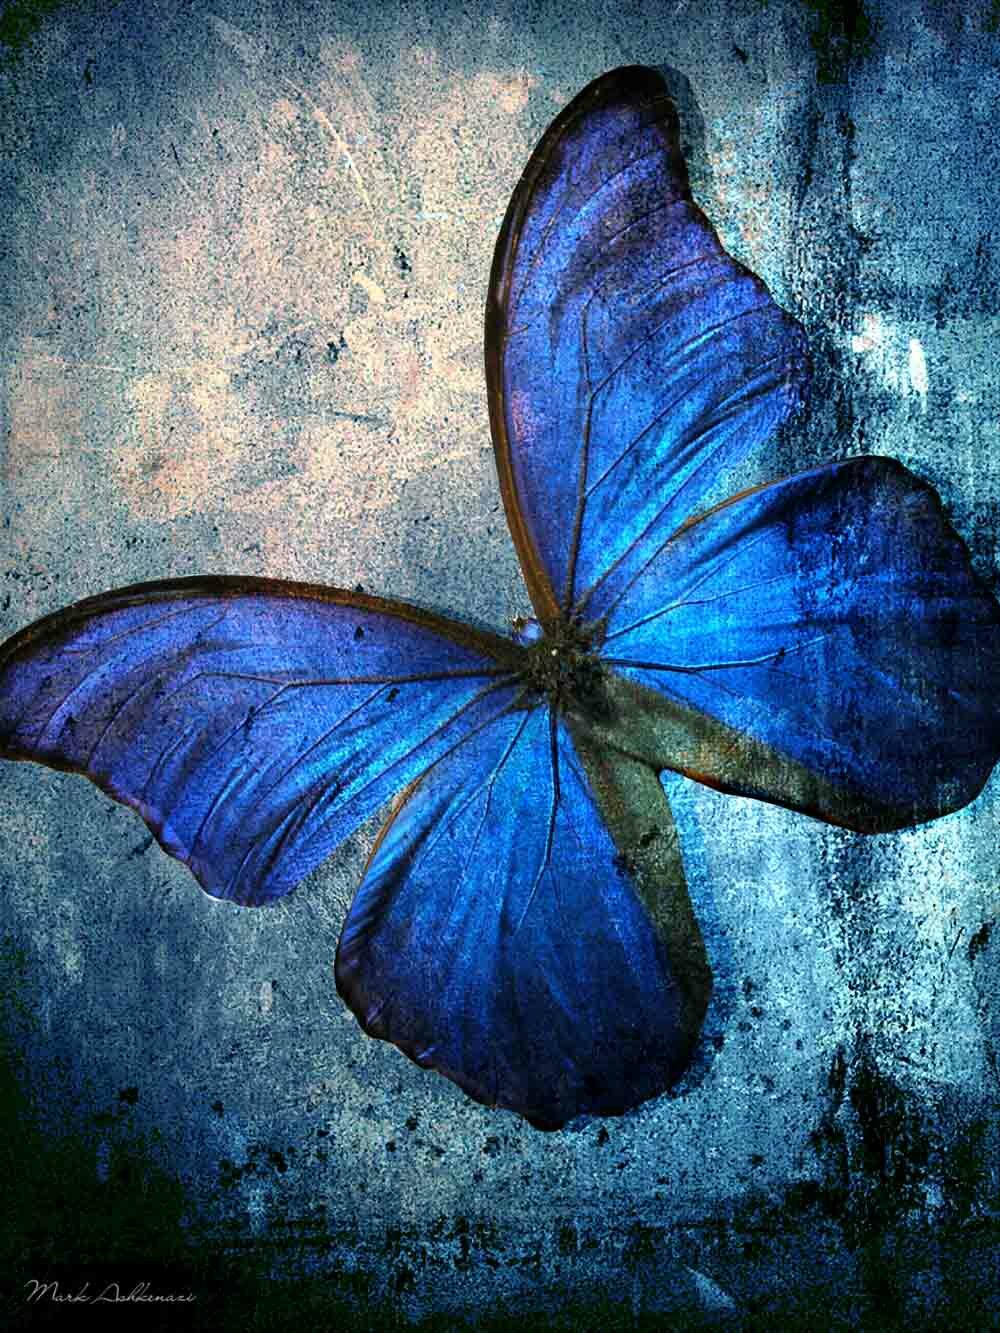 Red Barrel Studio® Butterfly I On Canvas by Mark Ashkenazi Print & Reviews